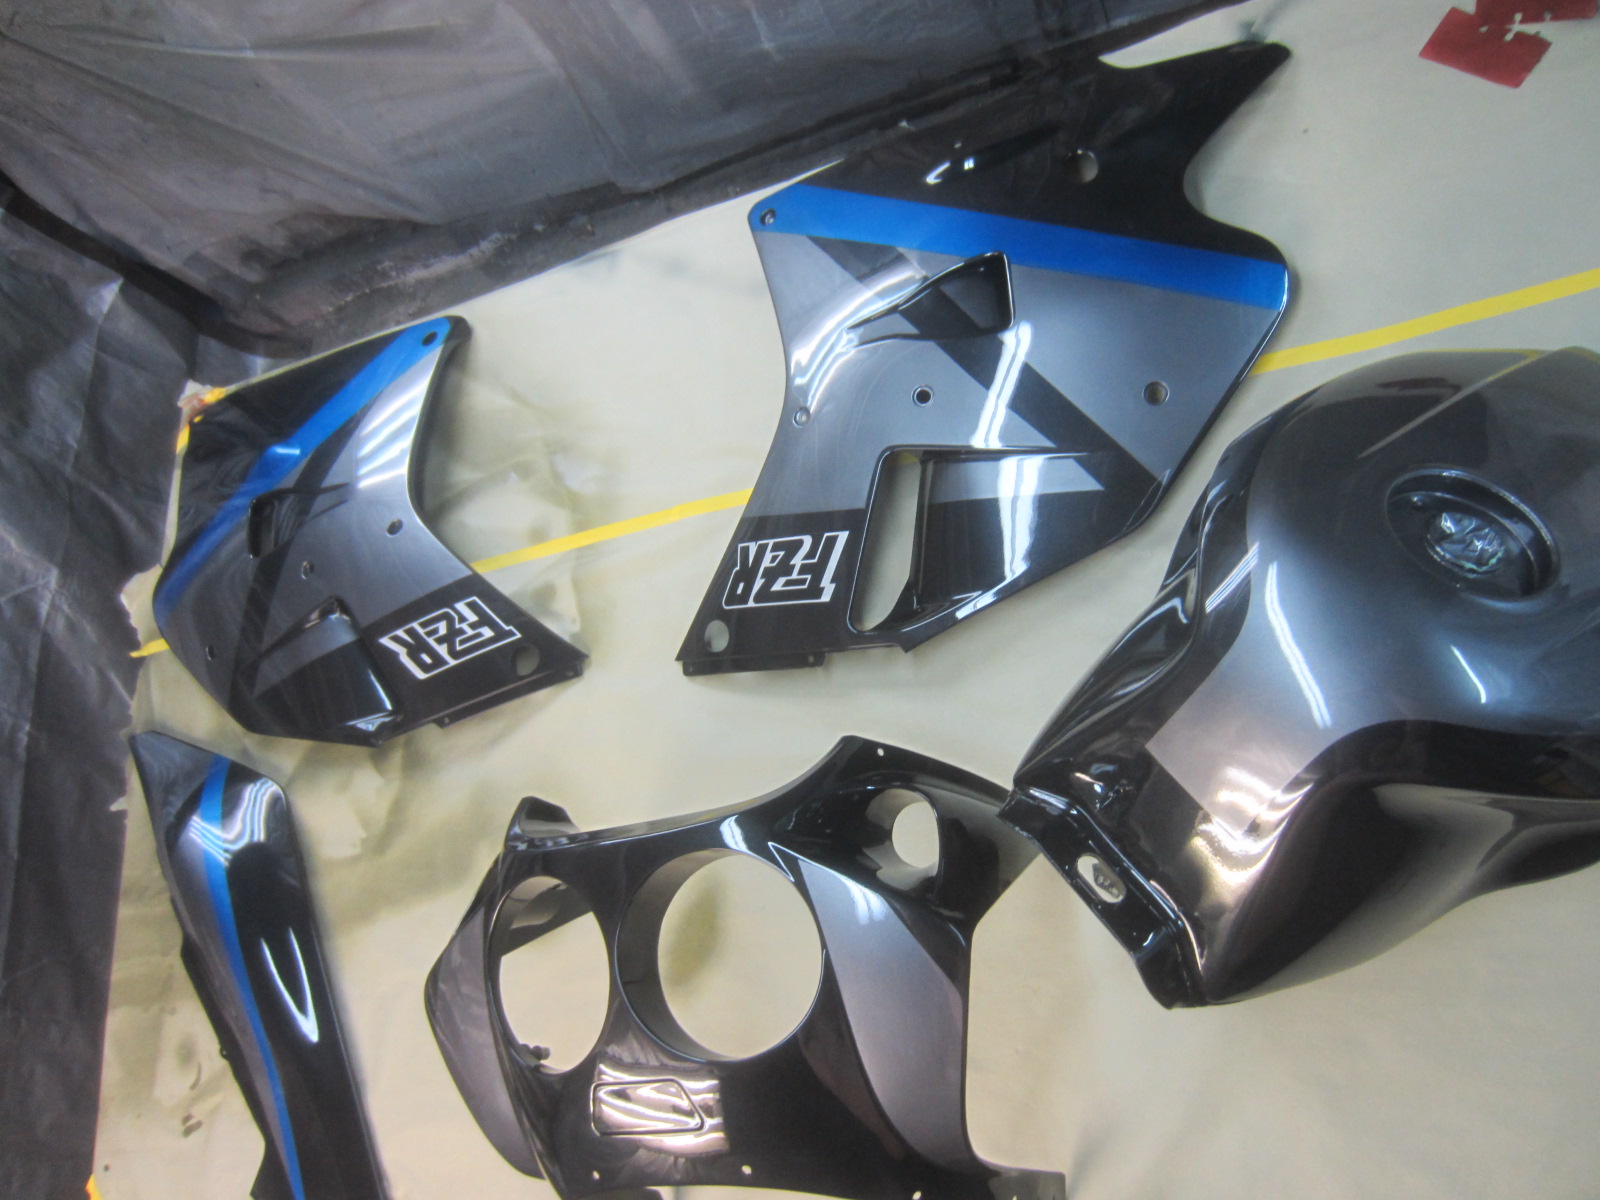 1990 FZR1000 Stock fairing and color scheme repair. Everything is done in paint accept our in-house 